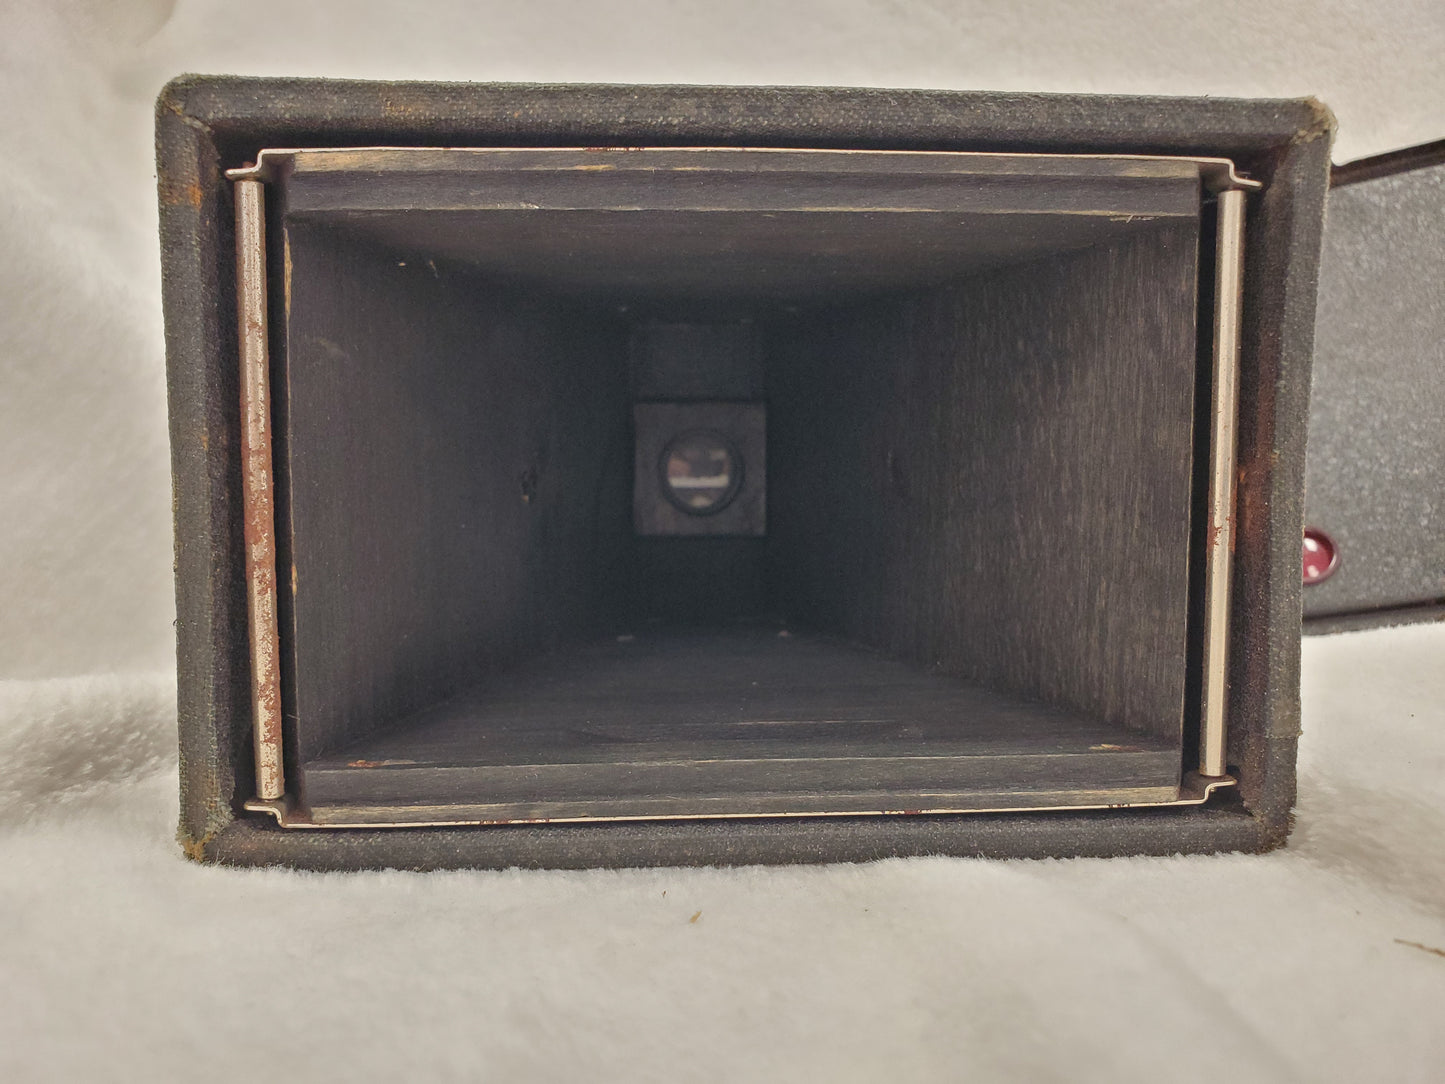 Early 1900's Ansco Buster Brown Camera Box